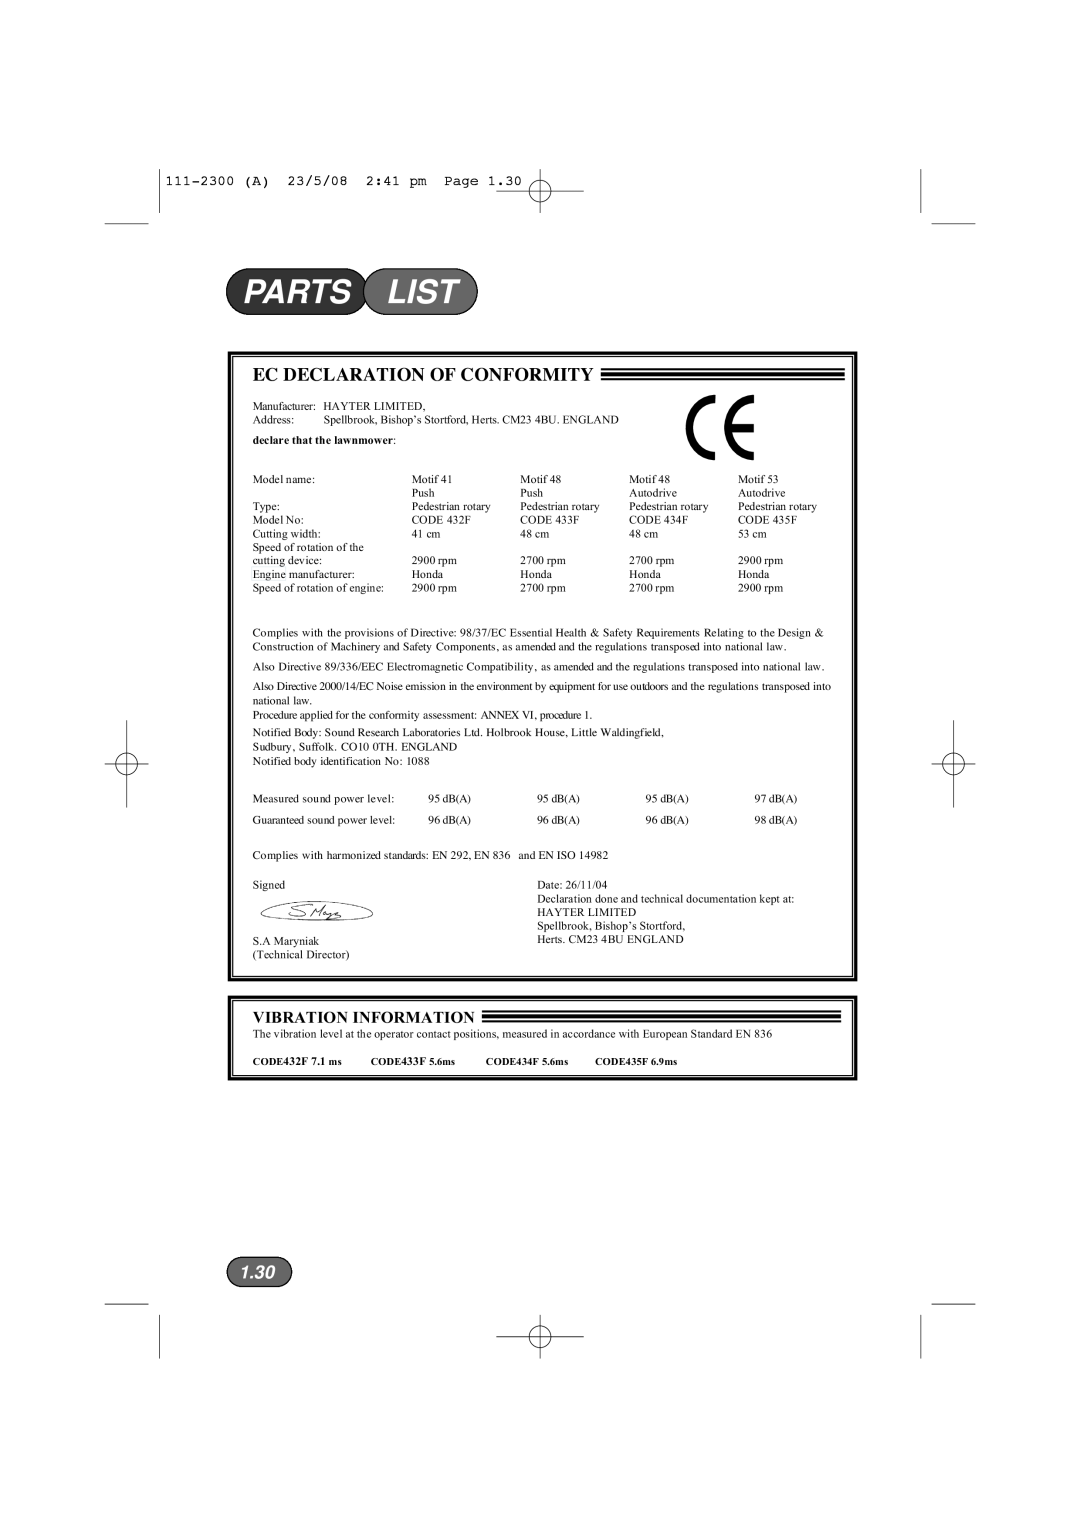 Hayter Mowers 433F Parts List, 1.30, Vibration Information, Ec Declaration Of Conformity, 111-2300A 23/5/08 2:41 pm Page 